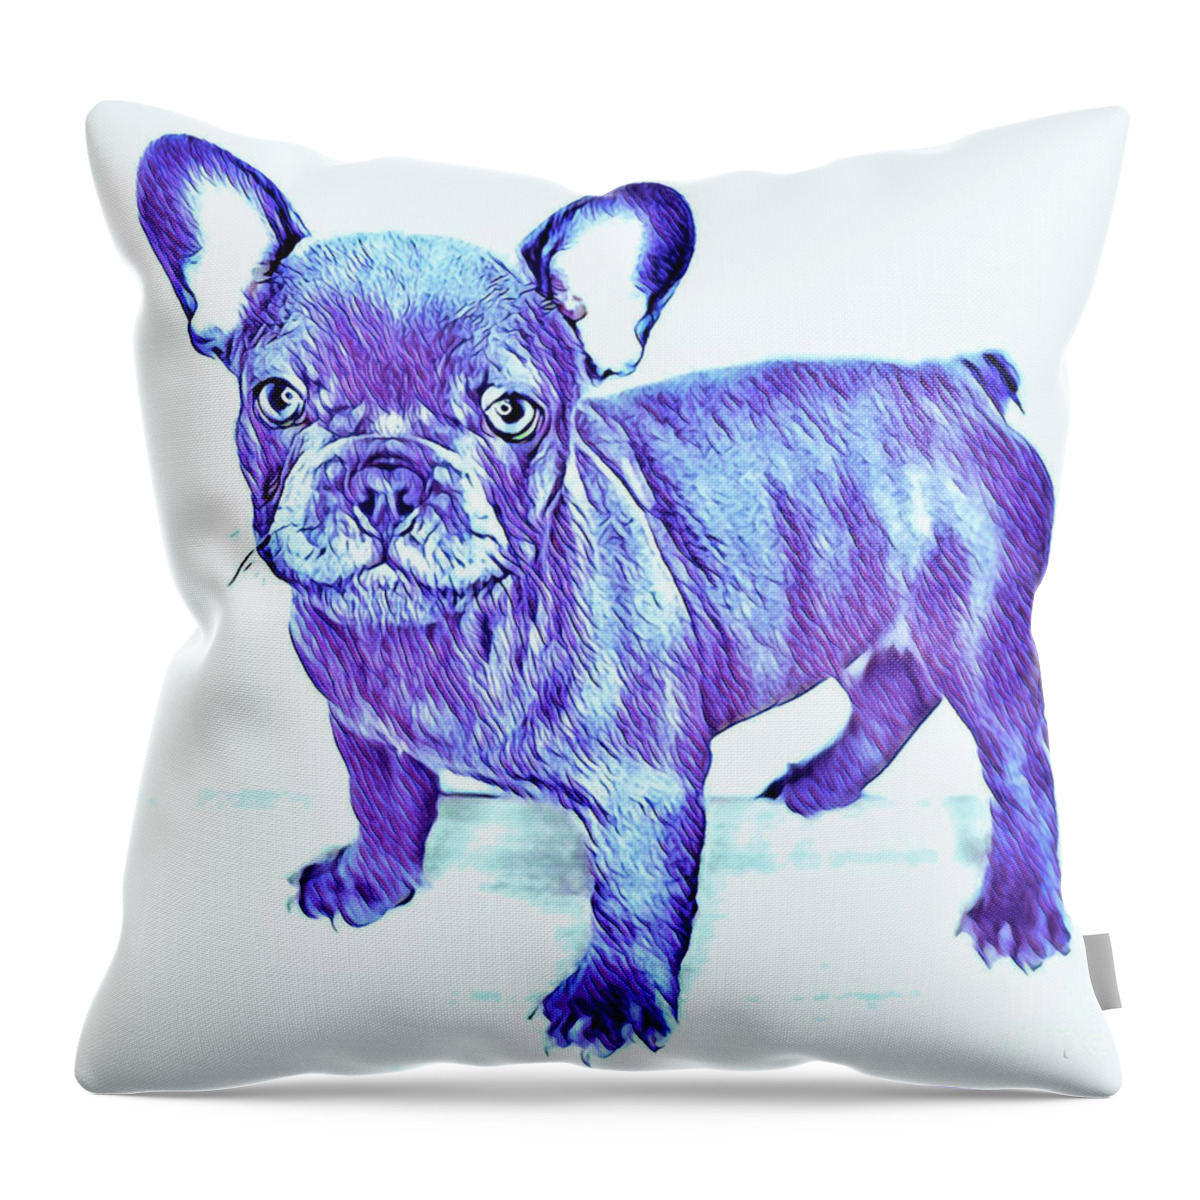 Blue French Bulldog. Frenchie. Dog. Pets. Animals. Throw Pillow featuring the digital art Da Ba Dee by Denise Railey